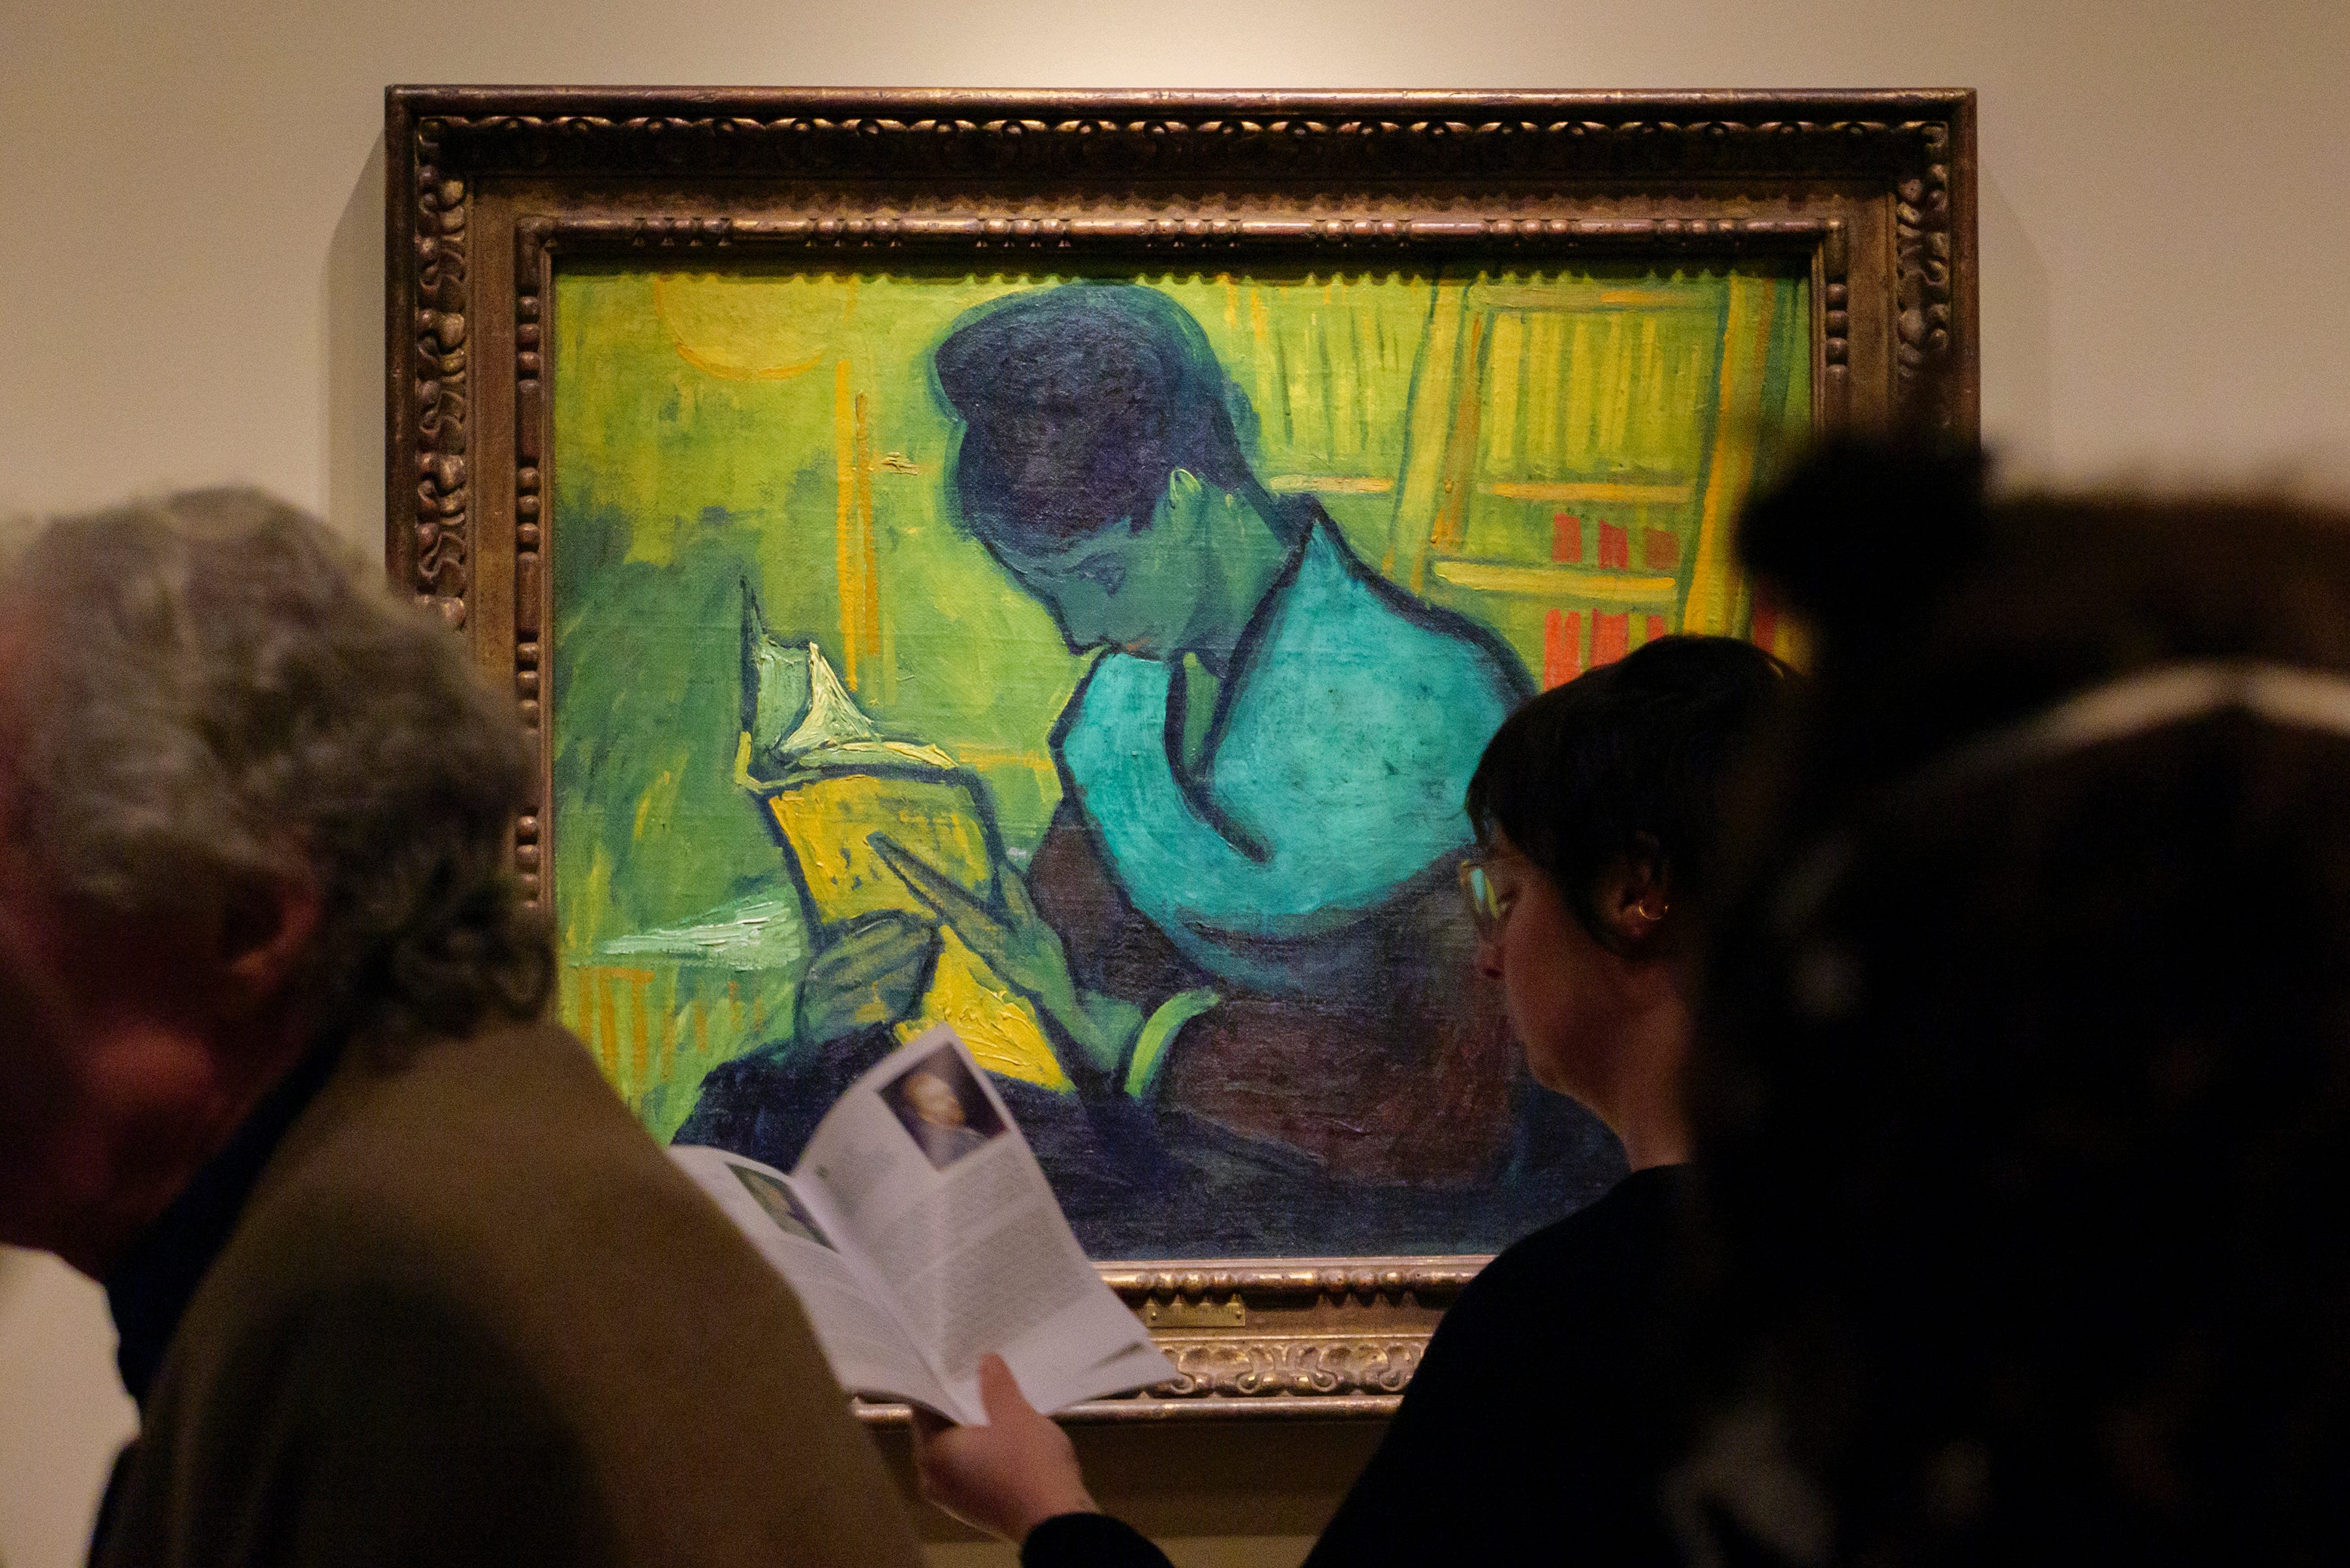 Visitors file past at the Van Gogh painting "Liseuse De Romans" - also known as "The Novel Reader", during the Van Gogh in America exhibit at the Detroit institute of Arts, Wednesday, Jan. 11, 2023. Brazilian art collector Gustavo Soter's art brokerage company, Brokerarte Capital Partners LLC, sued the DIA, describing an international hunt for a rare oil painting by the Dutch Post-Impressionist master.